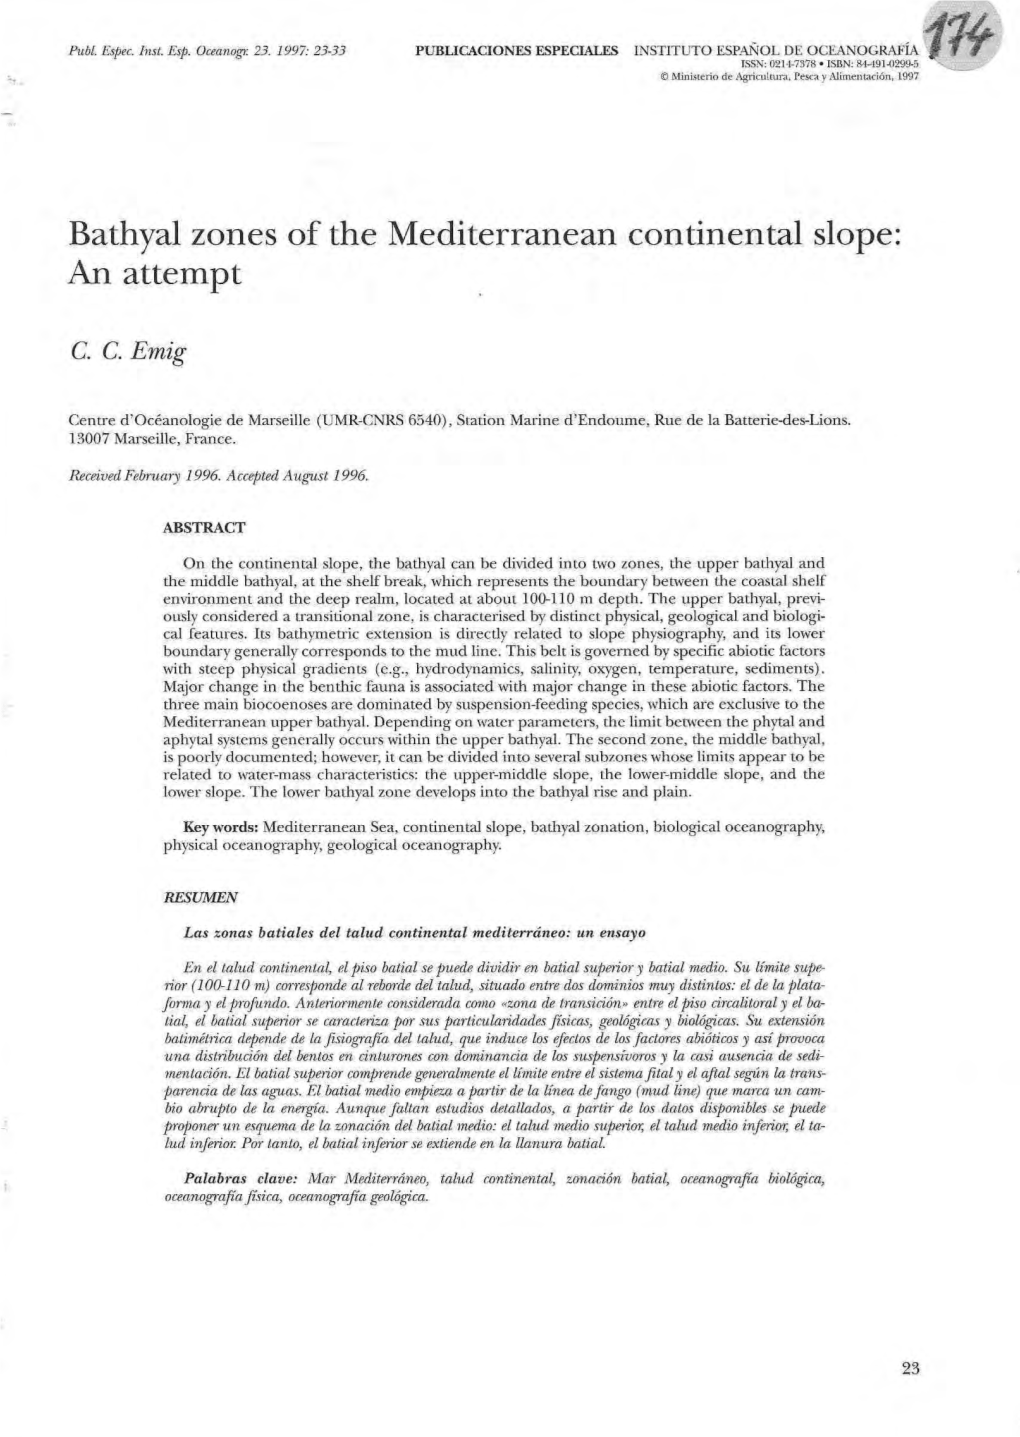 Bathyal Zones of the Mediterranean Continental Slope: an Attempt